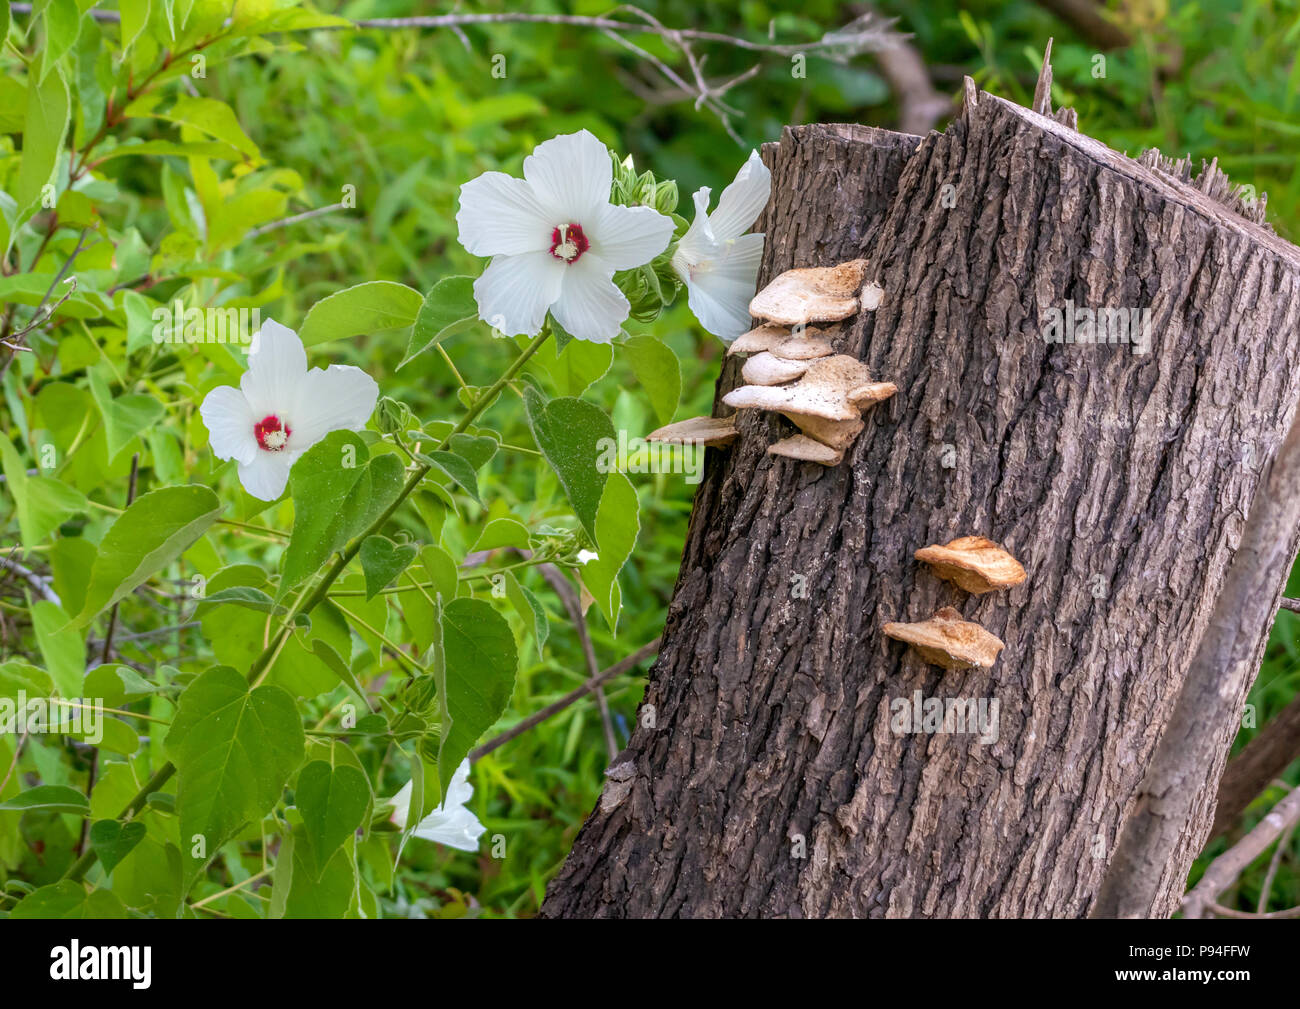 Wild hibiscus, Hibiscus moscheutos, grow near a lake shore next to a stump with fungus, in a beautiful vertical composition. Stock Photo